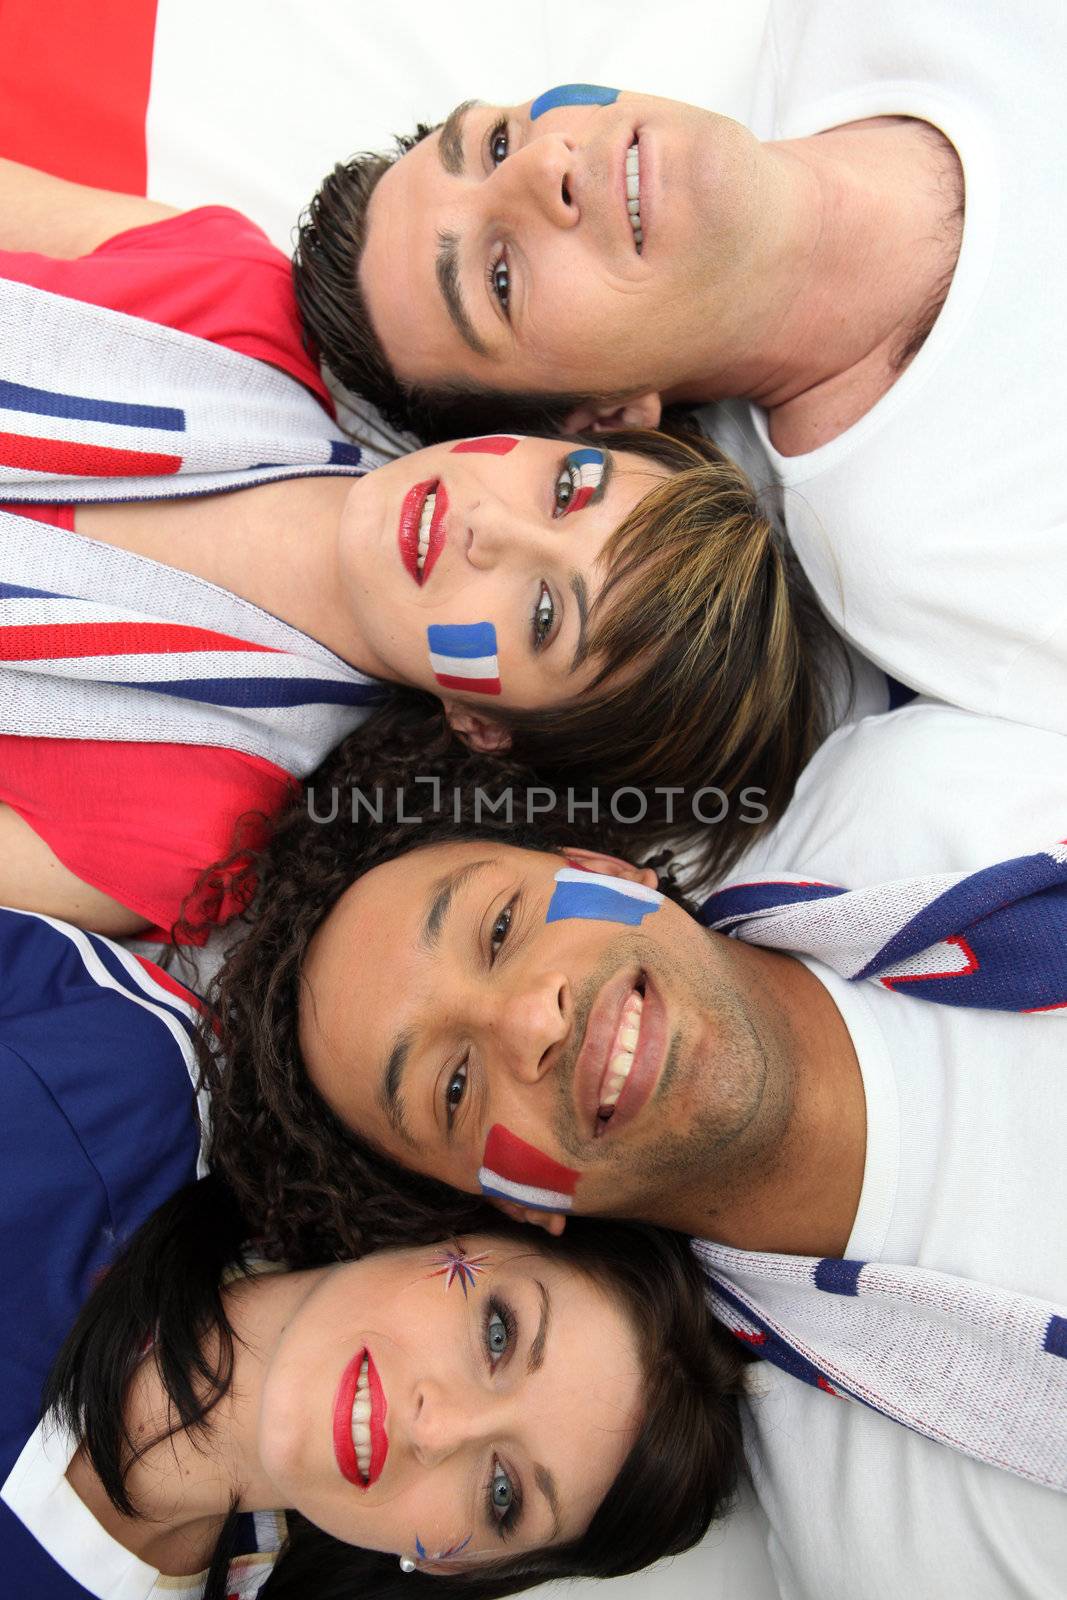 French football supporters by phovoir